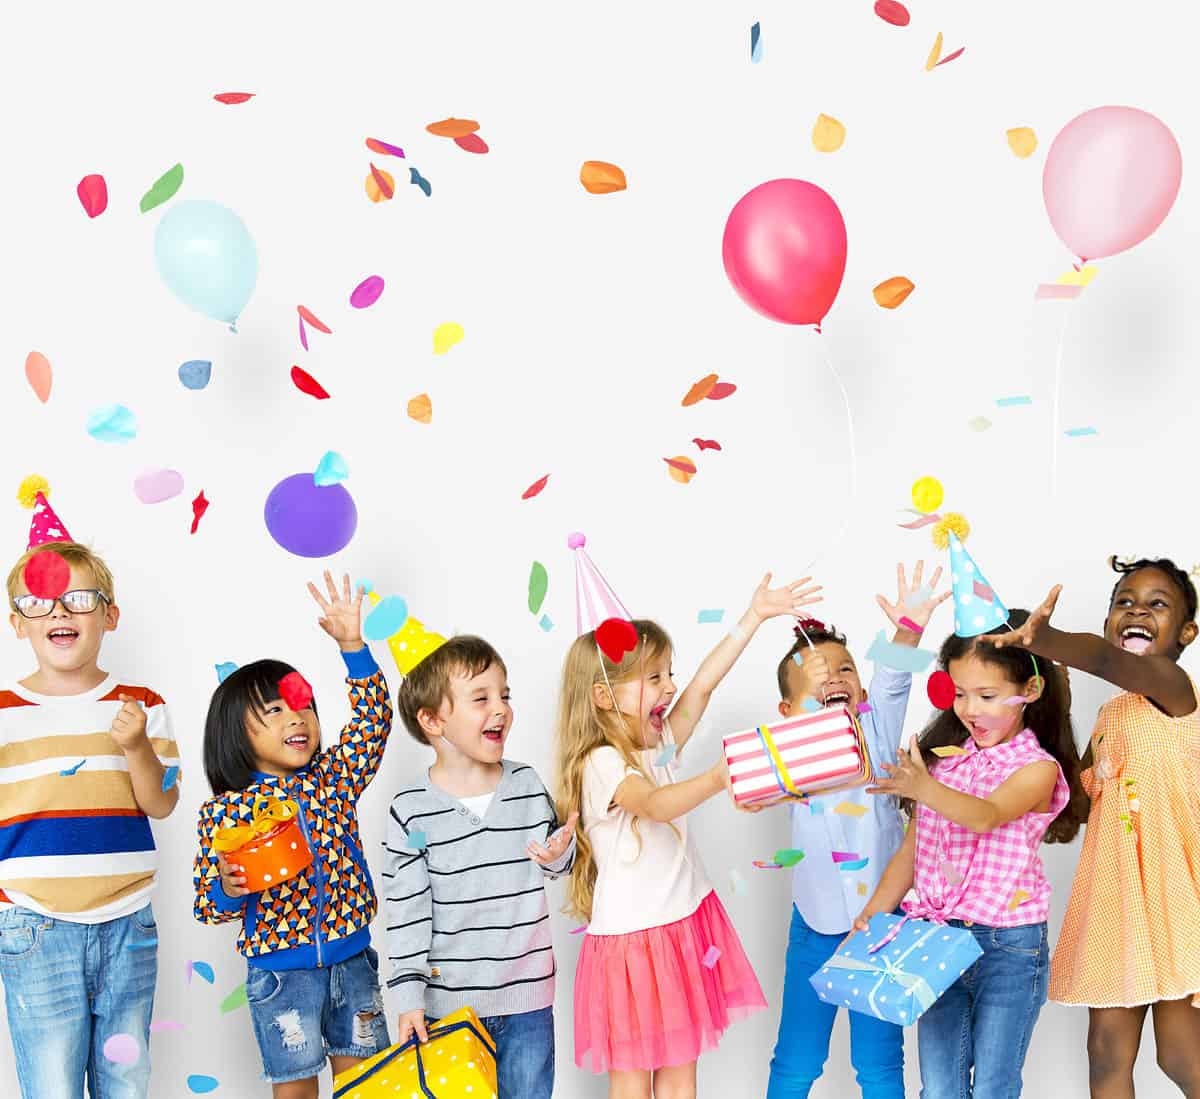 Kids celebrating at a birthday party are some of the most cherished memories of a person's life.